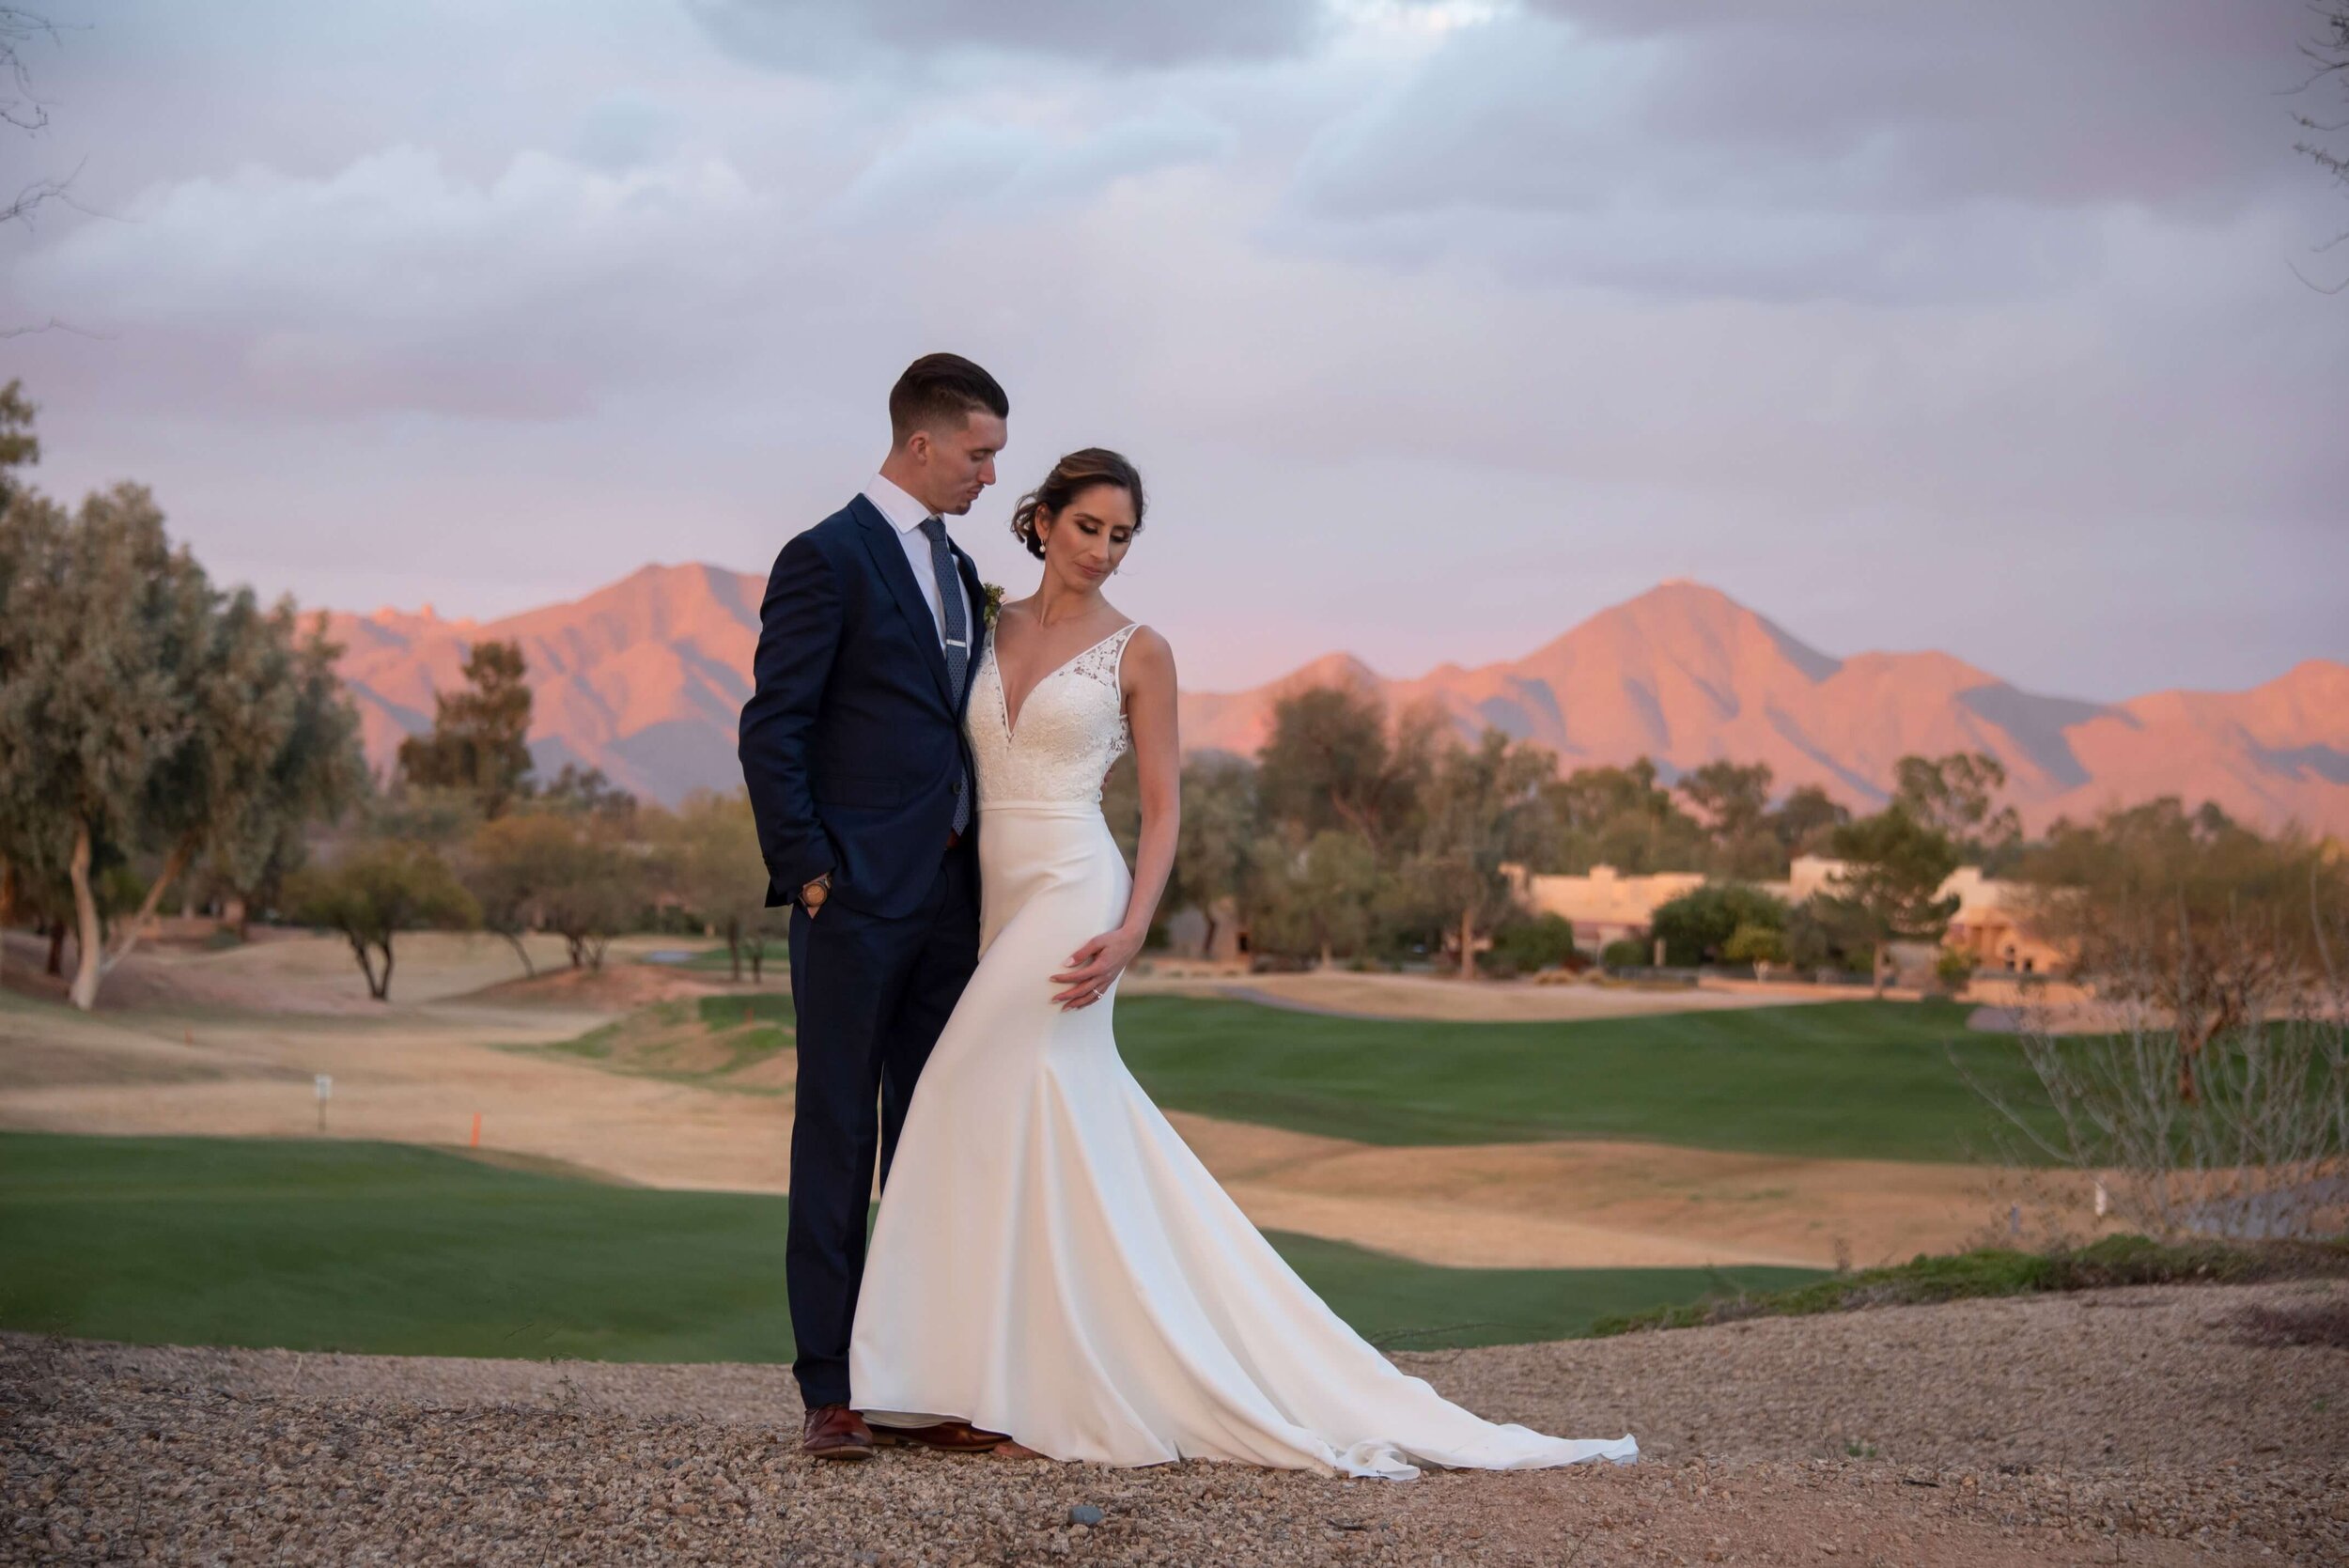 Bride and groom at sunset at Gainey Ranch Golf Club in Scottsdale, Arizona